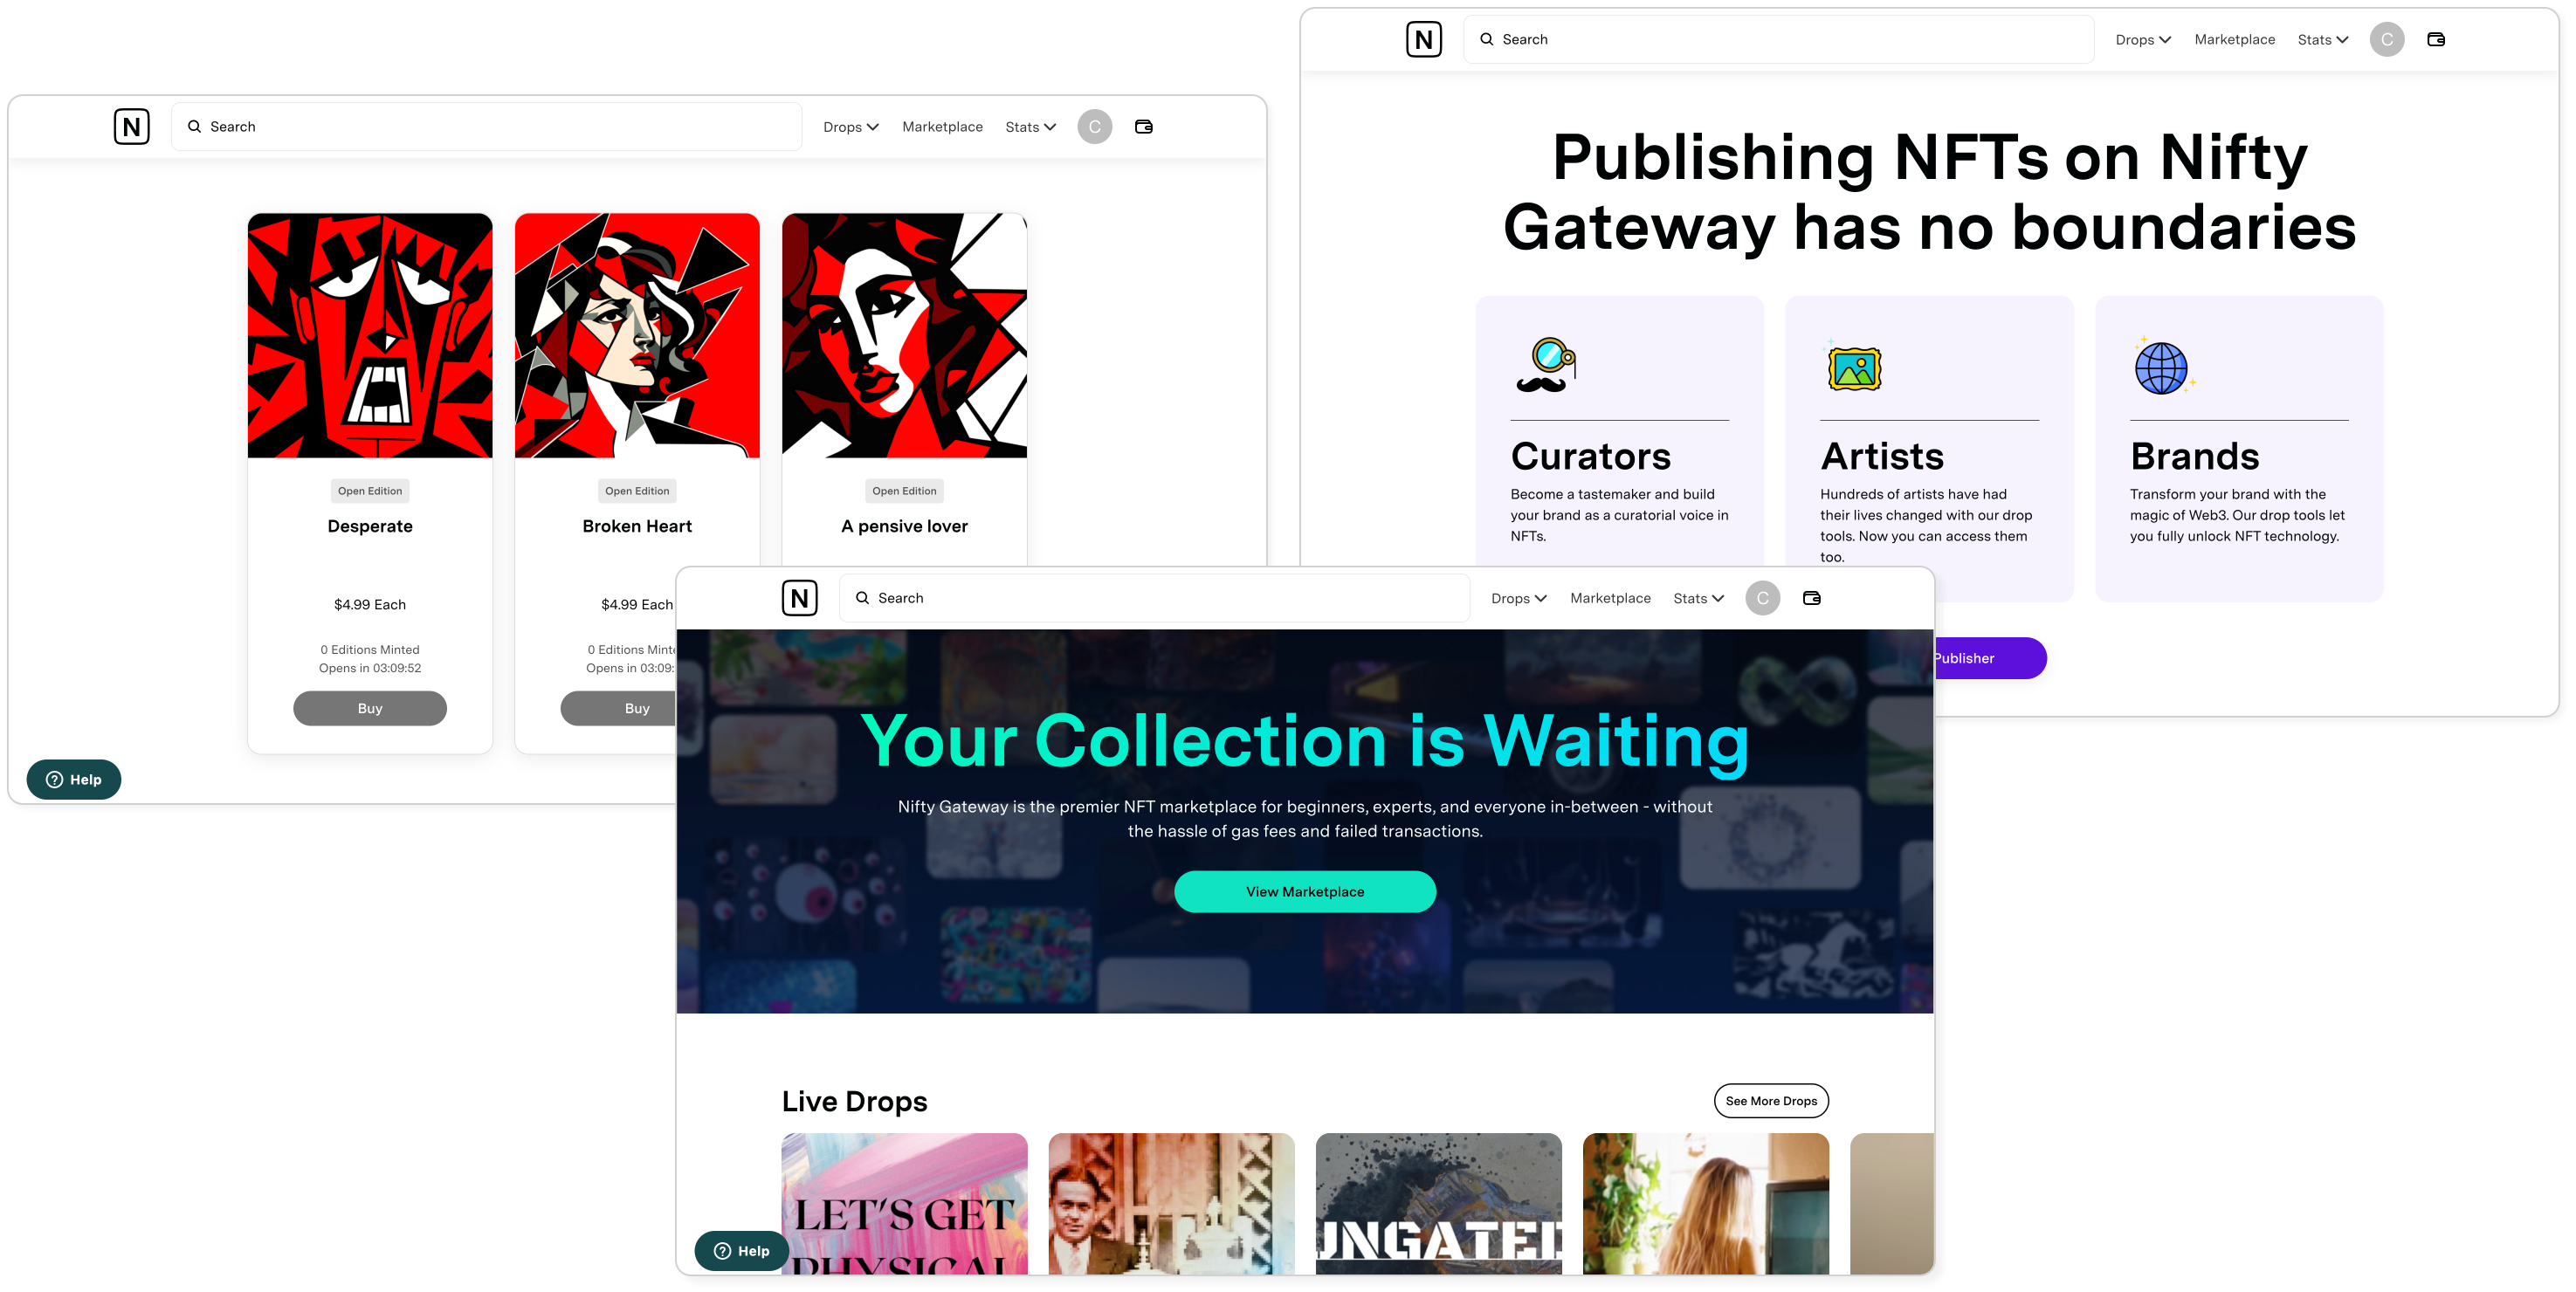 Three screenshots from the Nifty Gateway NFT marketplace